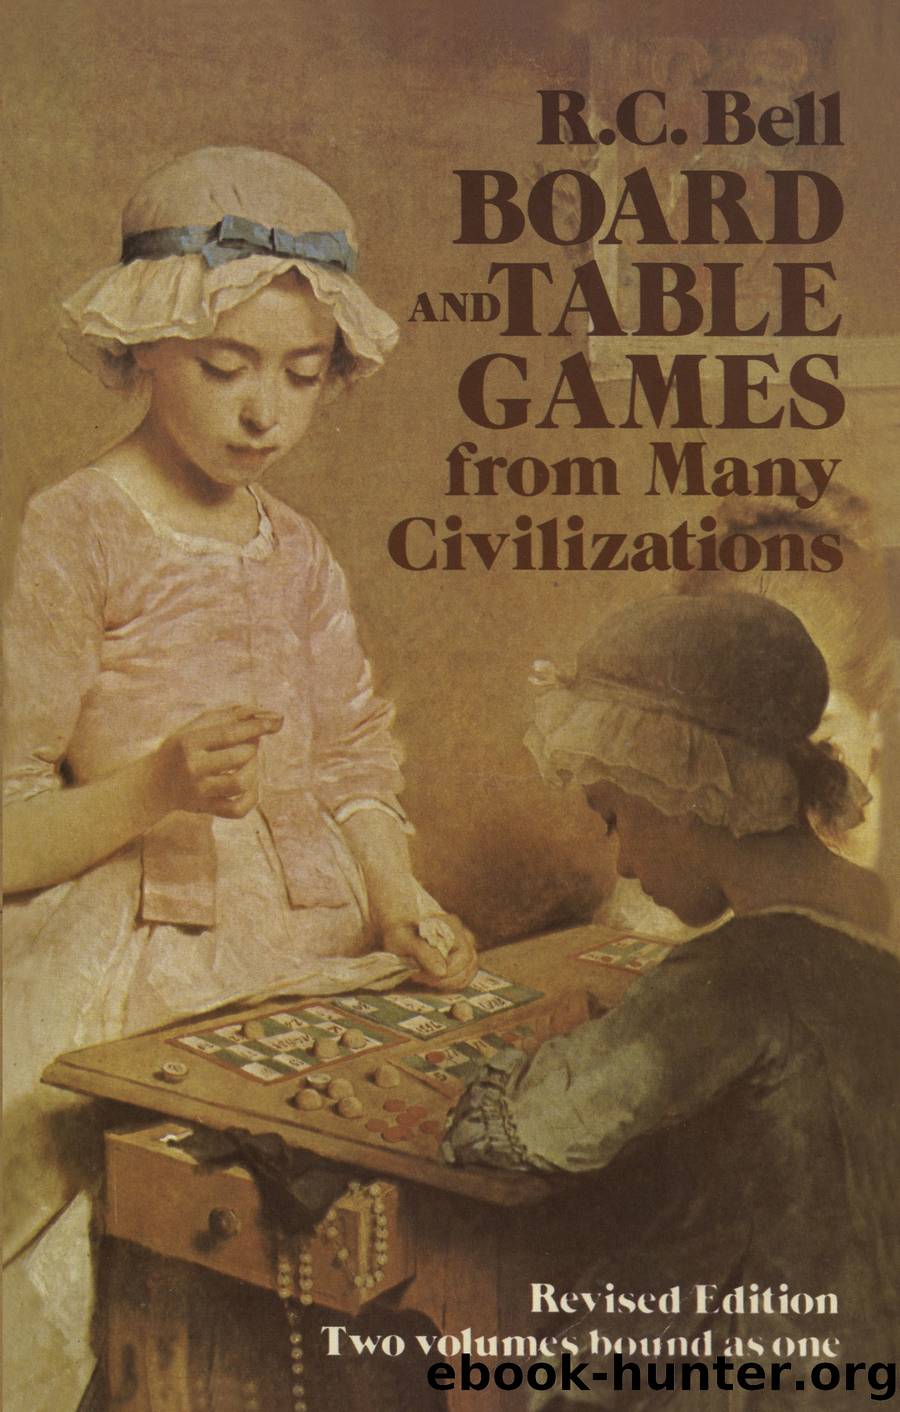 Board and Table Games from Many Civilizations by R. C. Bell